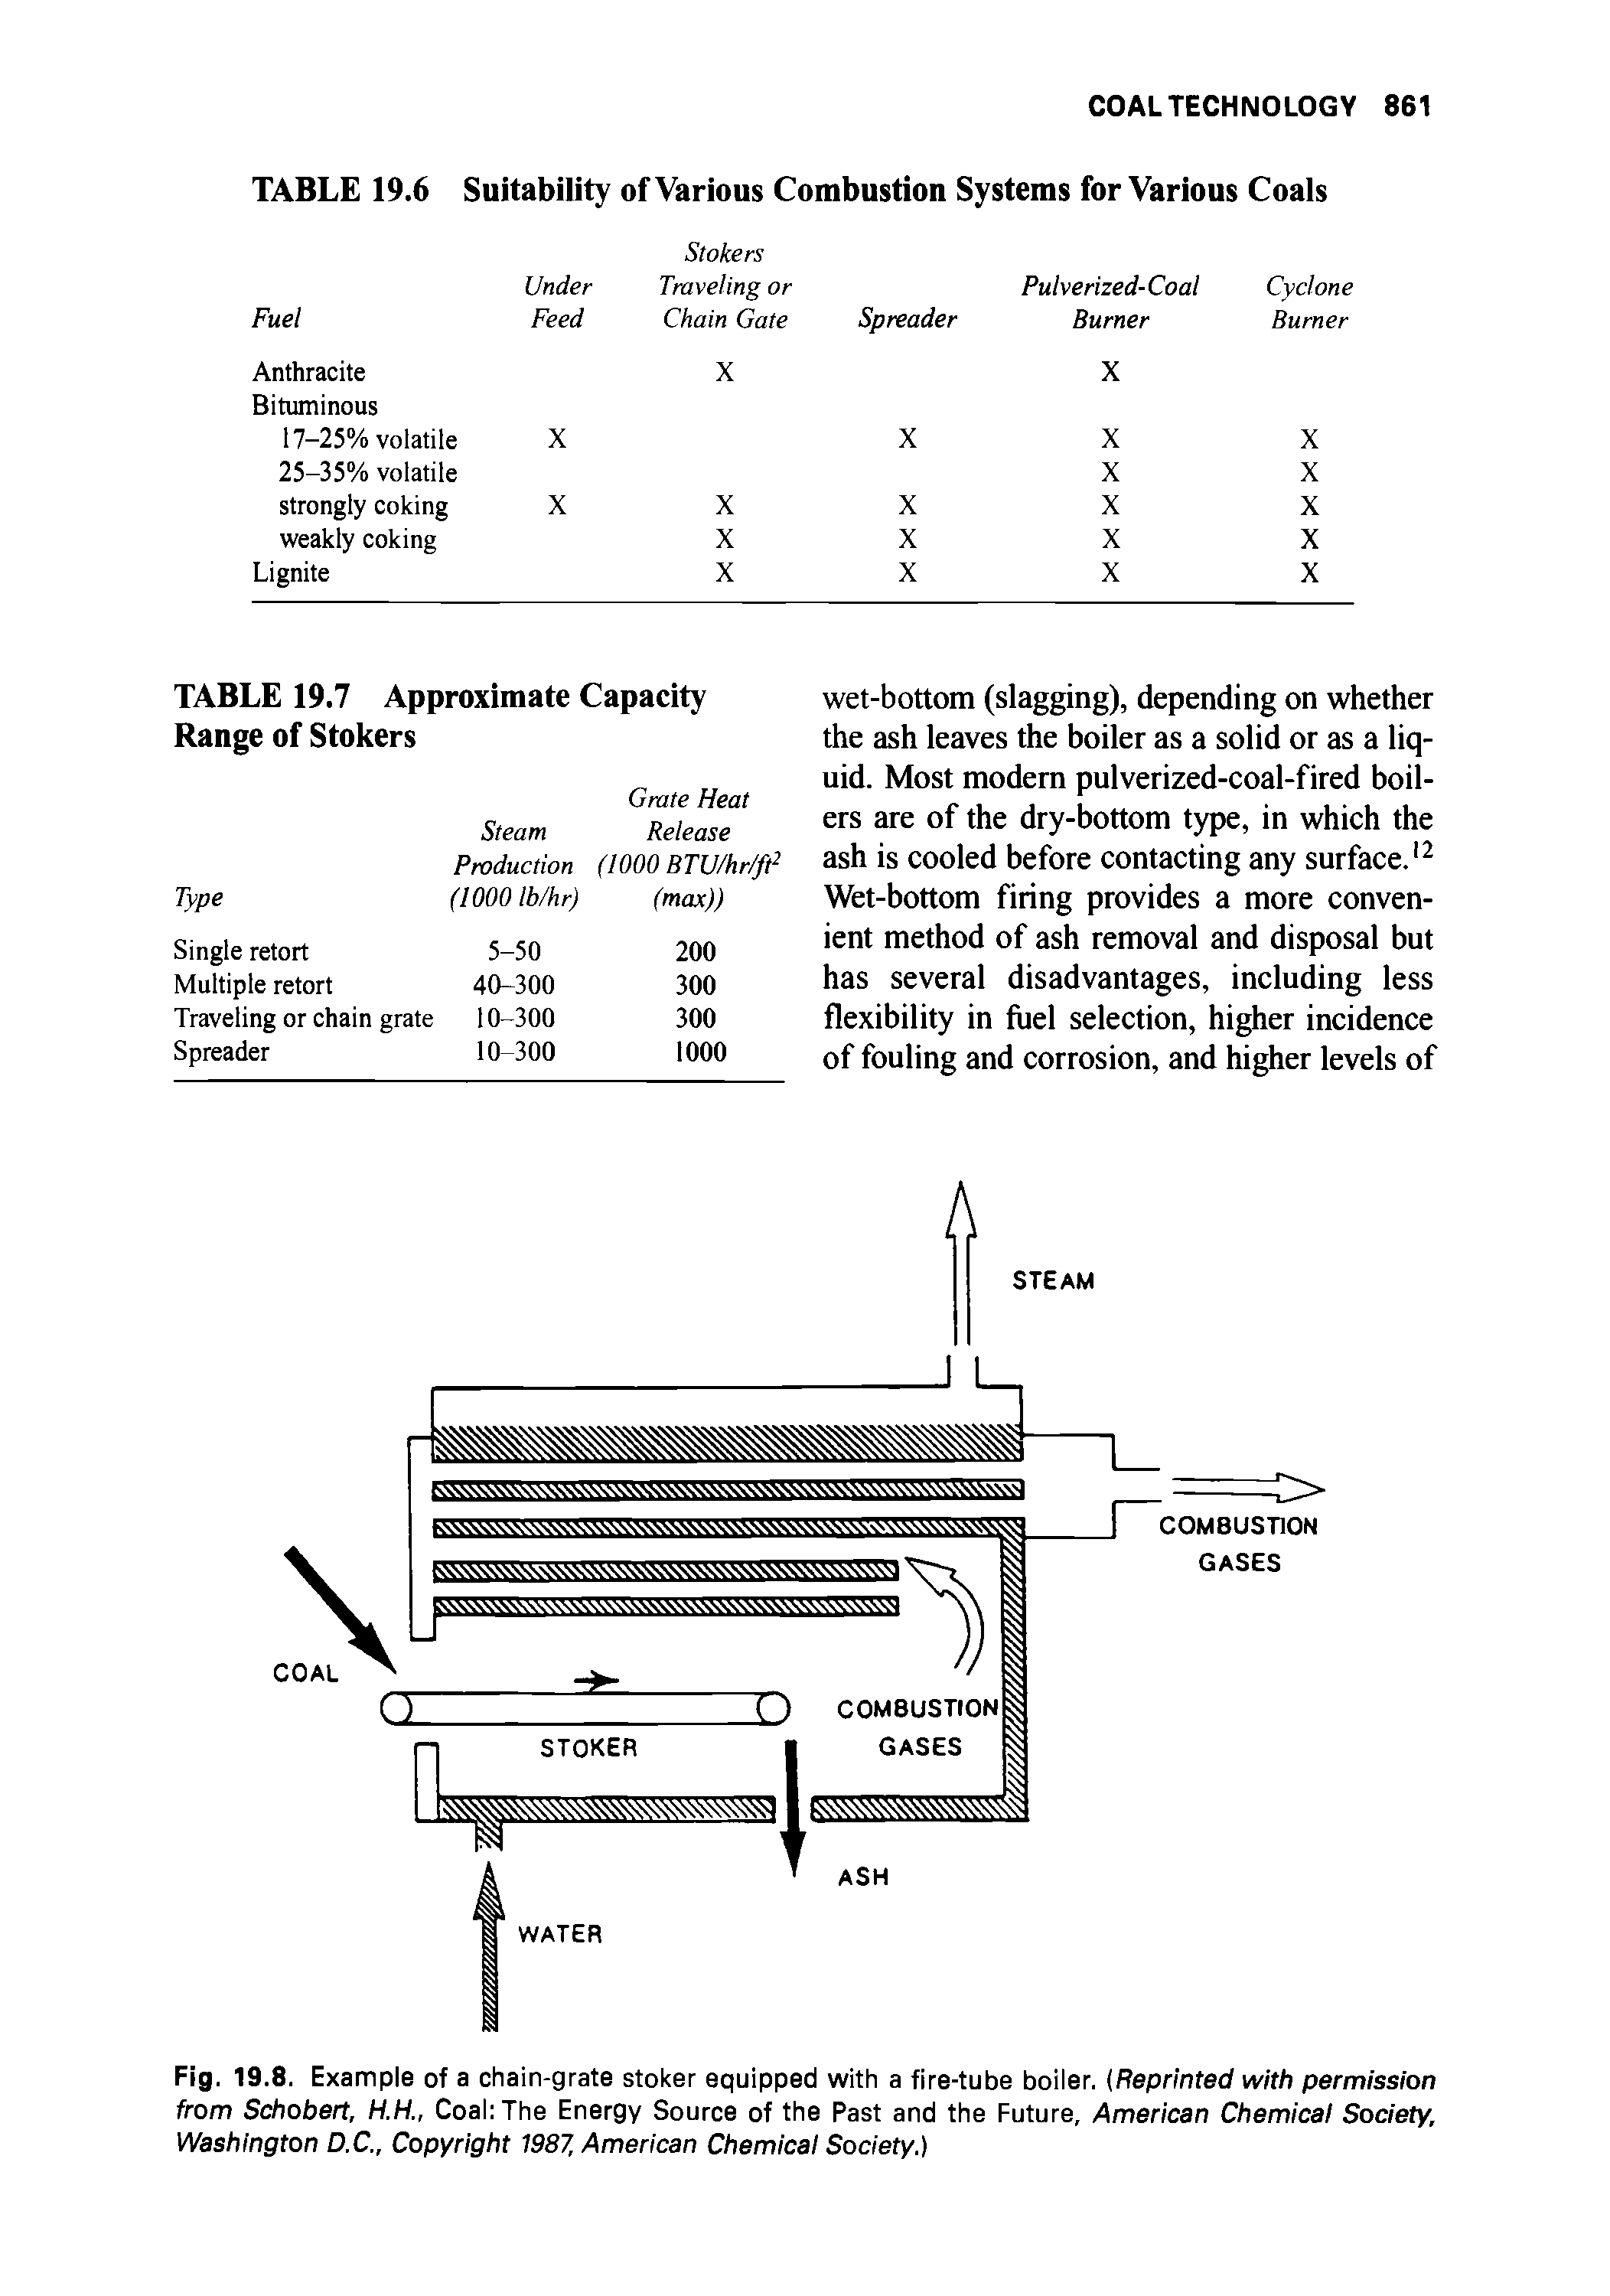 Fig. 19.8. Example of a chain-grate stoker equipped with a fire-tube boiler. (Reprinted with permission from Schobert, H.H., Coal The Energy Source of the Past and the Future, American Chemical Society, Washington D.C., Copyright 1987, American Chemical Society.)...